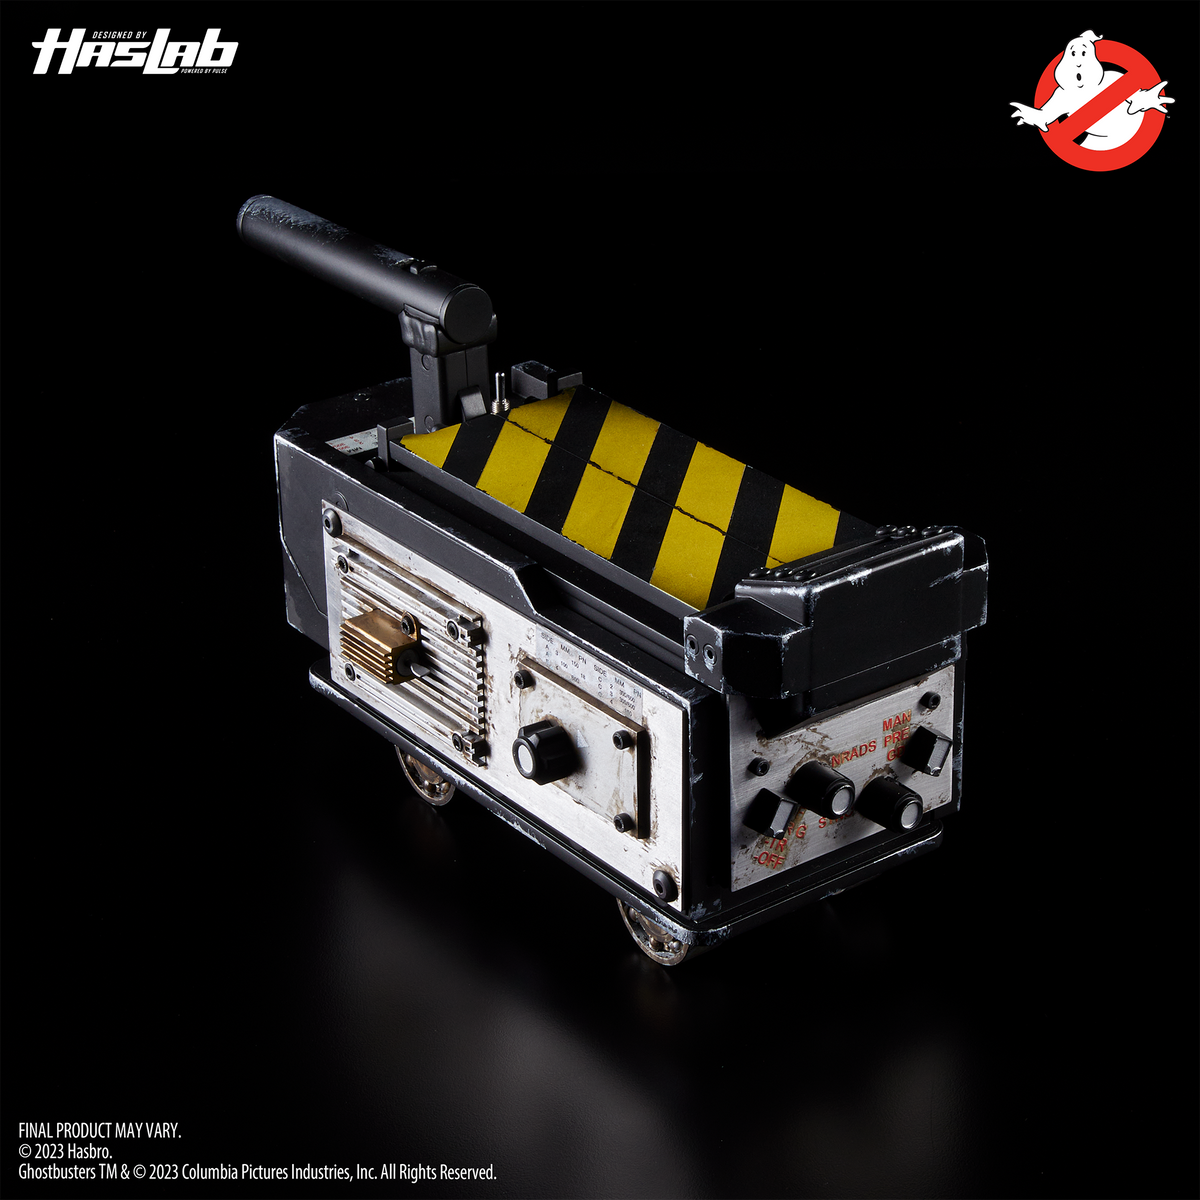 GHOSTBUSTERS GHOST TRAP MINI KIT - THE TOY STORE